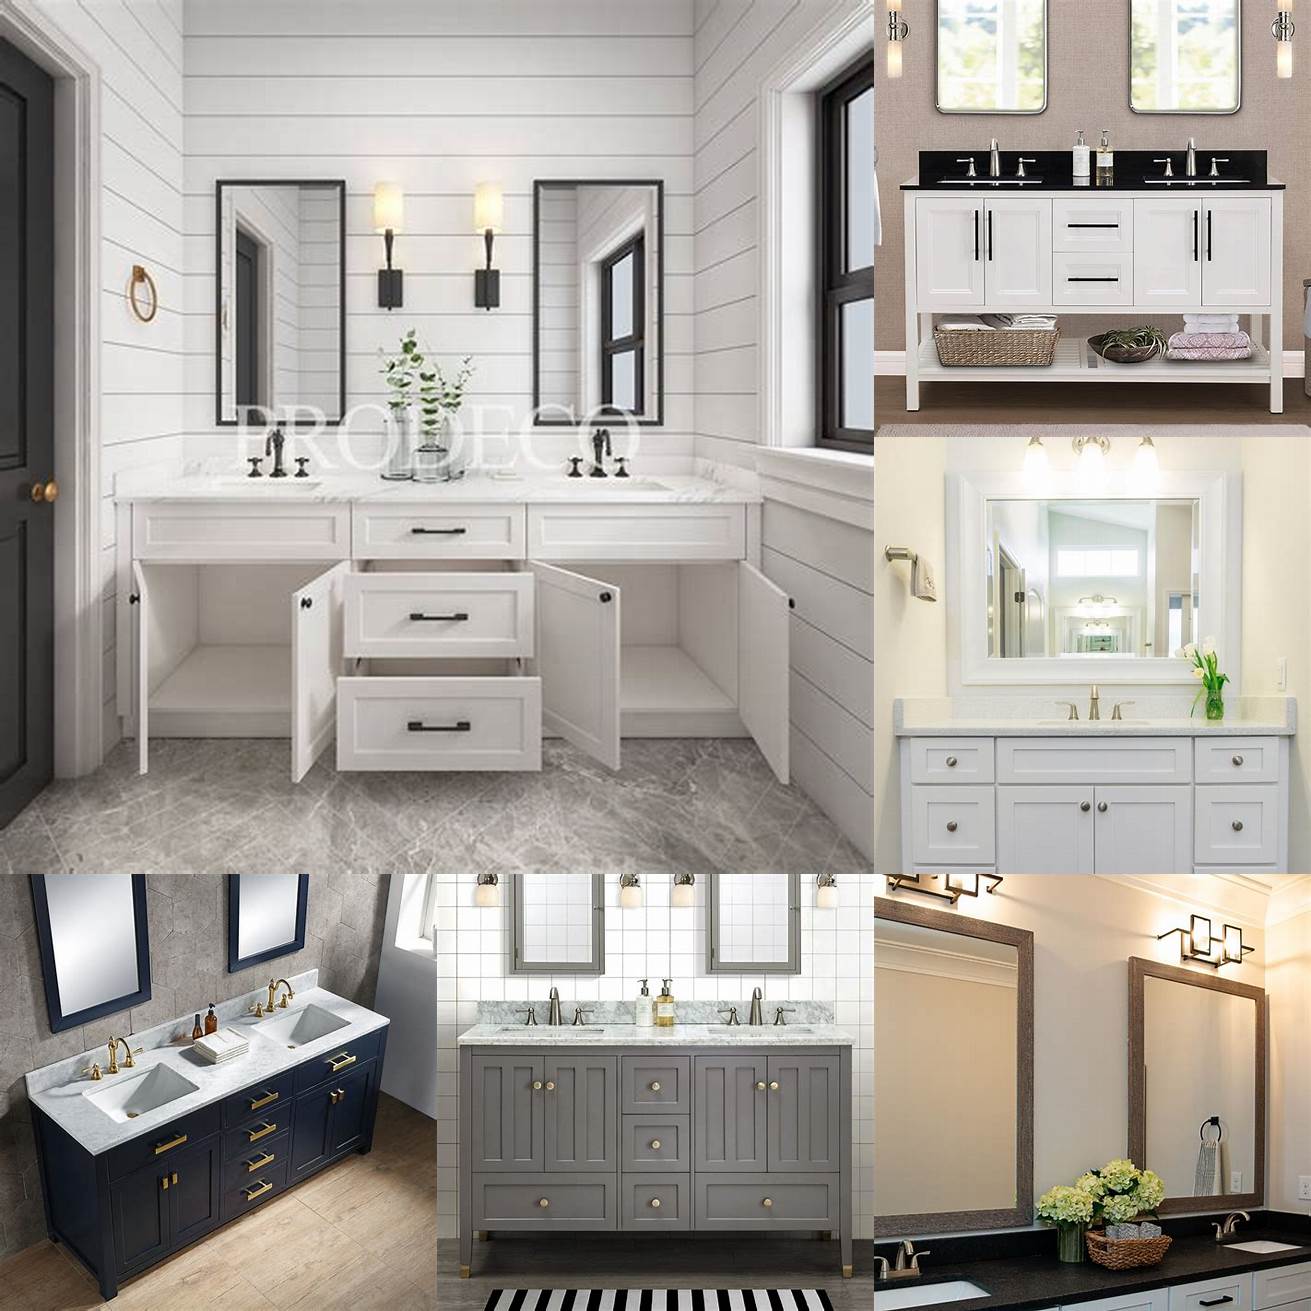 Transitional double vanity with shaker cabinets and quartz countertop